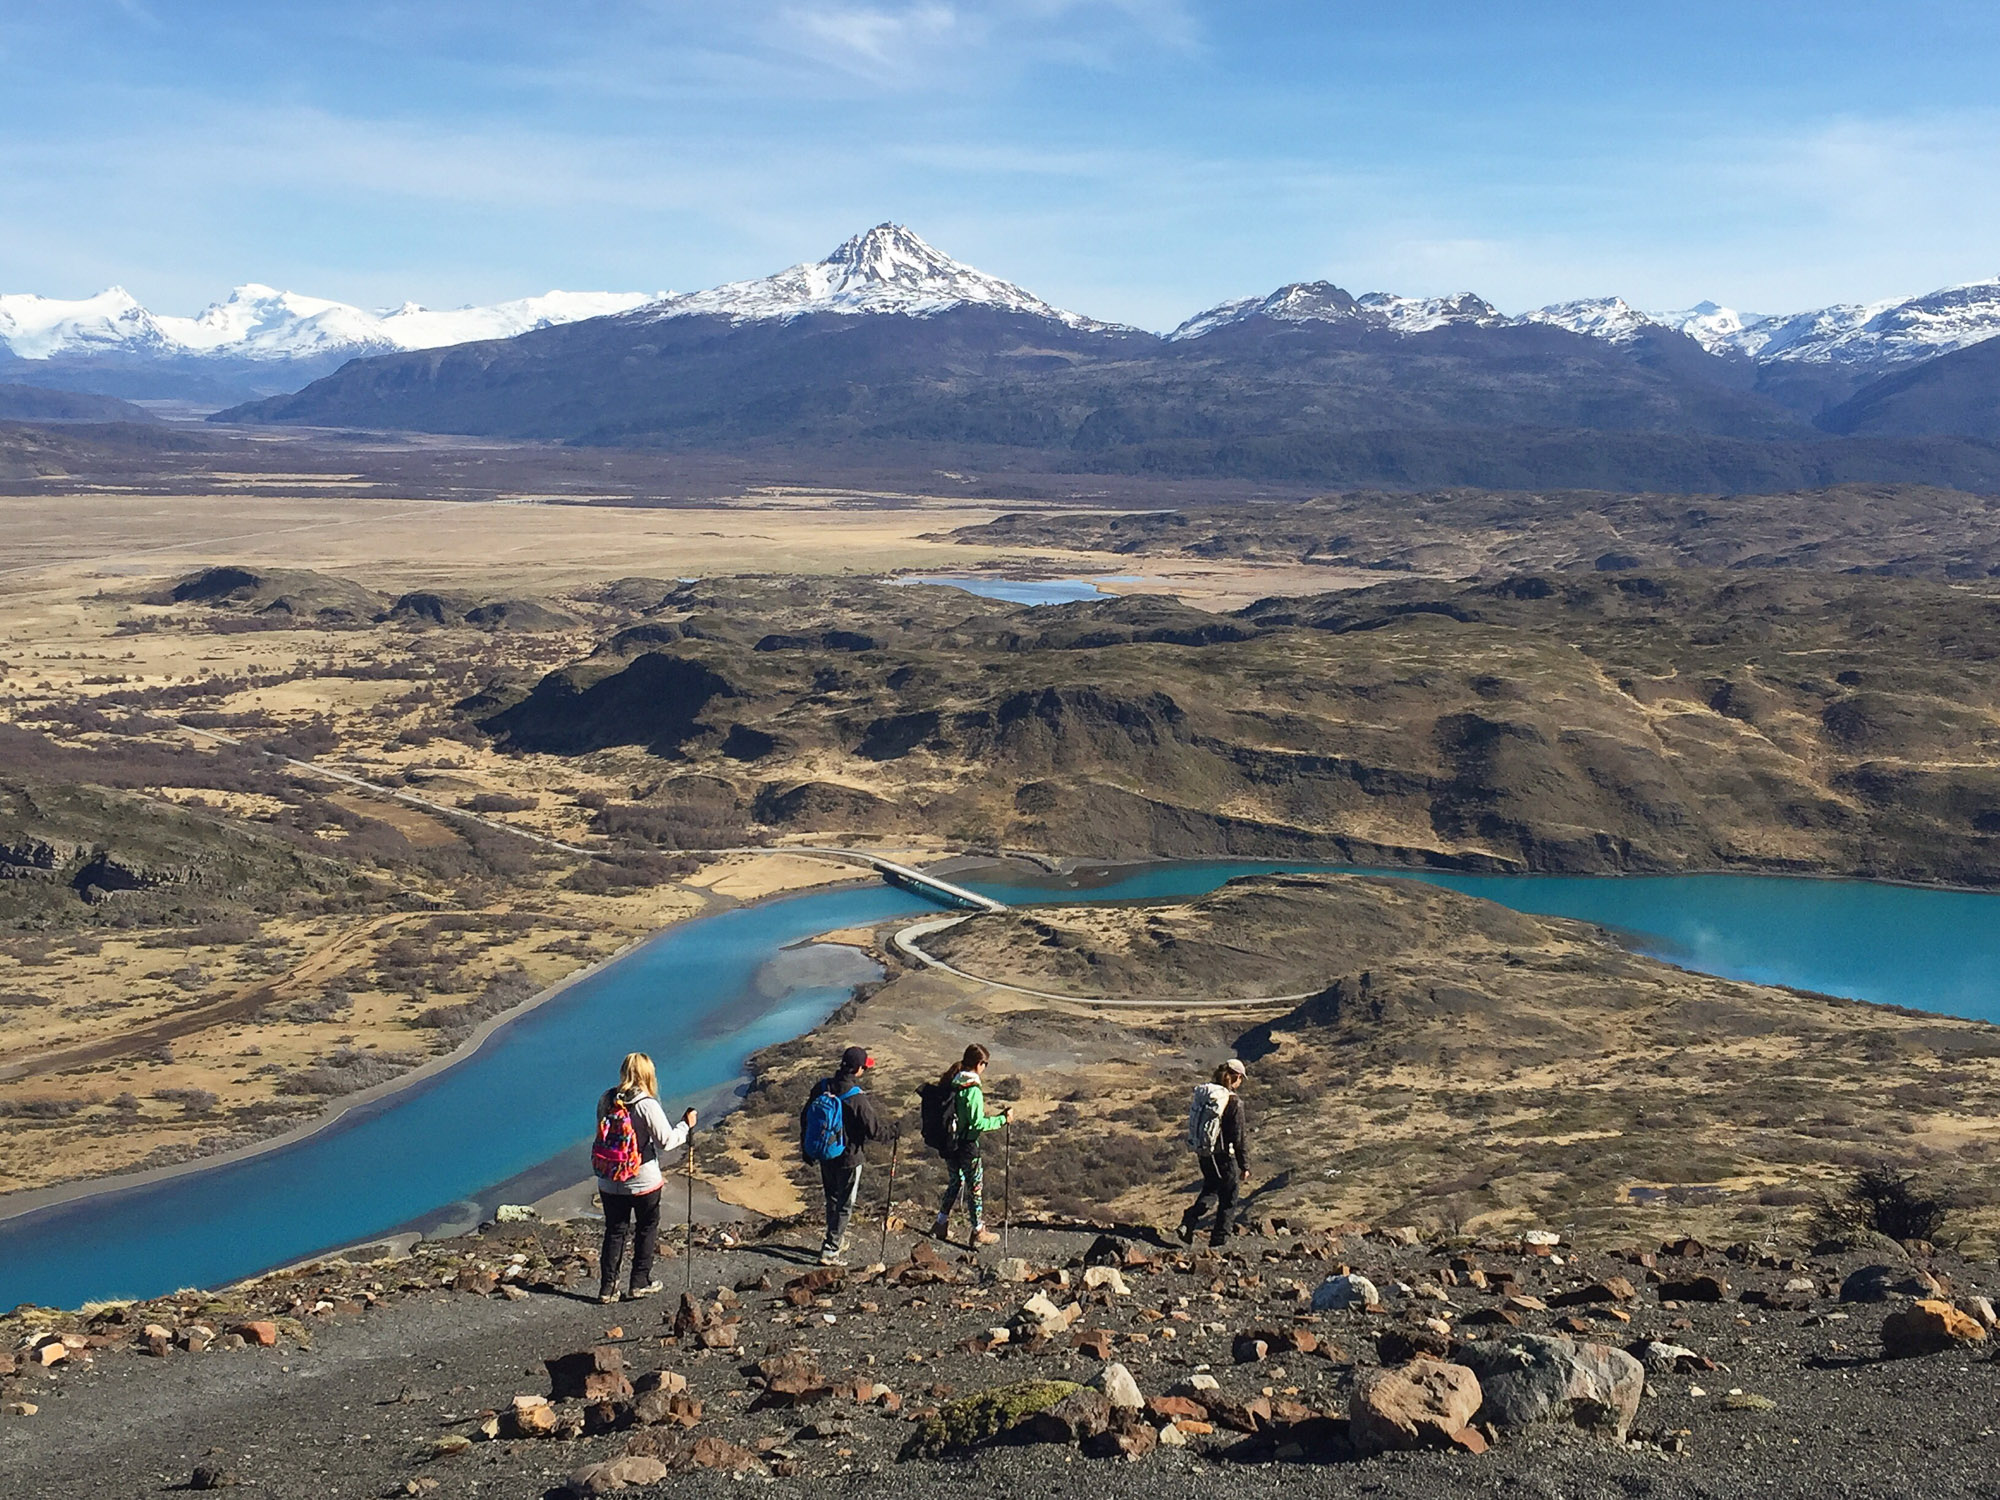 A full-day Patagonia hiking trip along the Paso de Agostini, a little-known trail